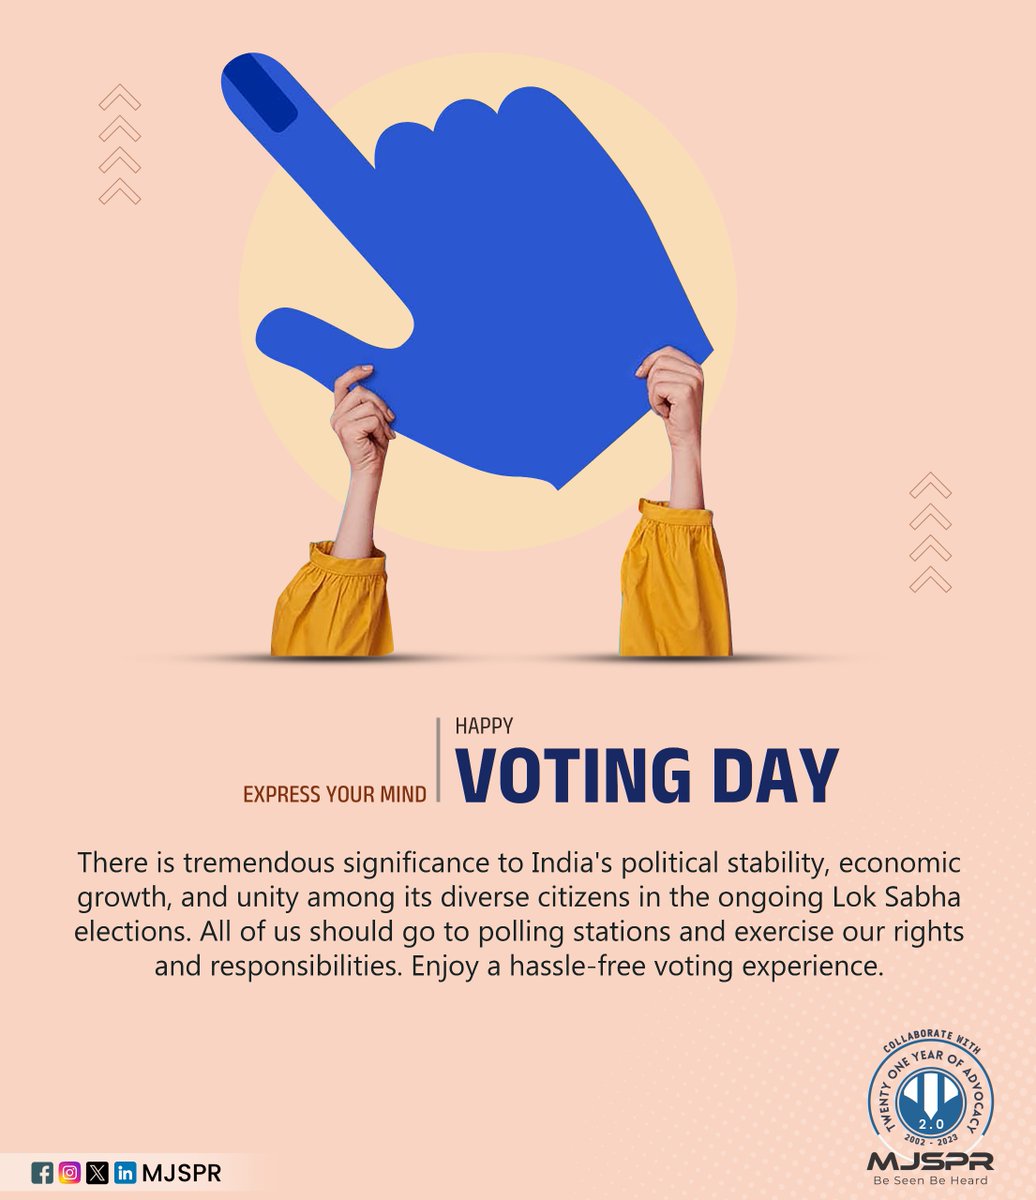 Express your mind. Happy Voting Day

#IndianElections #Democracy #VoteIndia #ElectionDay #Politics #ElectoralProcess #VotingRights #CitizenParticipation #PoliticalParties #ElectionCommission #BallotBox #CampaignTrail #ElectoralReforms #ElectoralSystem